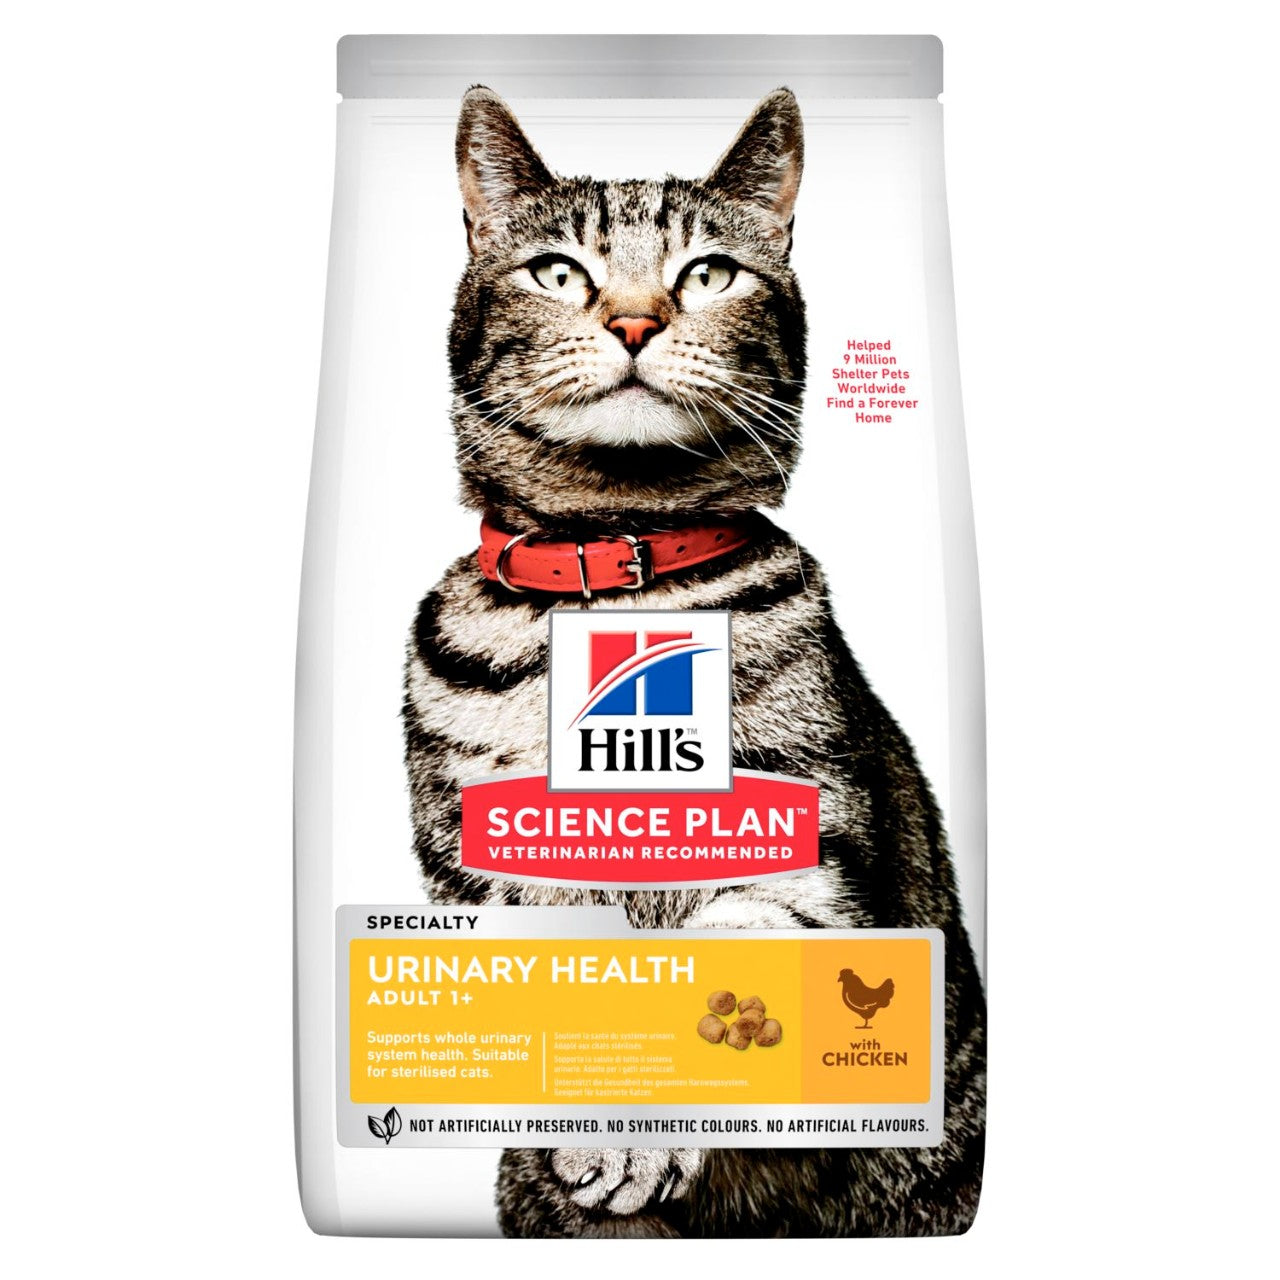 HILL'S Science Plan Urinary Health Adult Cat Dry Food With Chicken